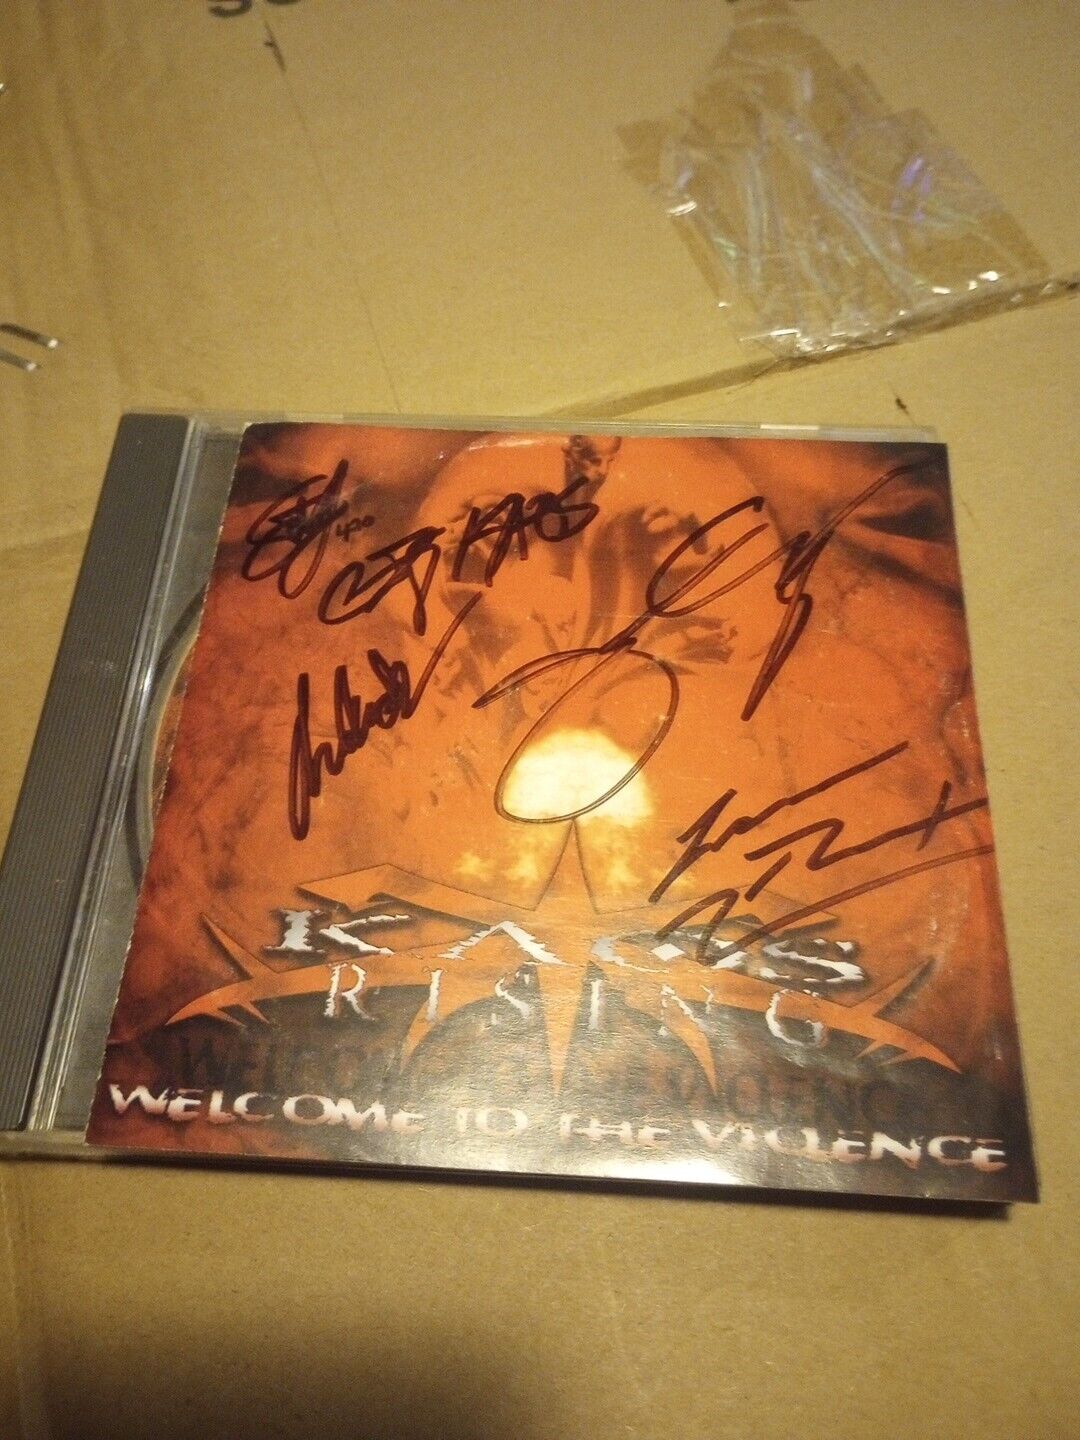 Kaos Rising Welcome To The Violence CD Signed